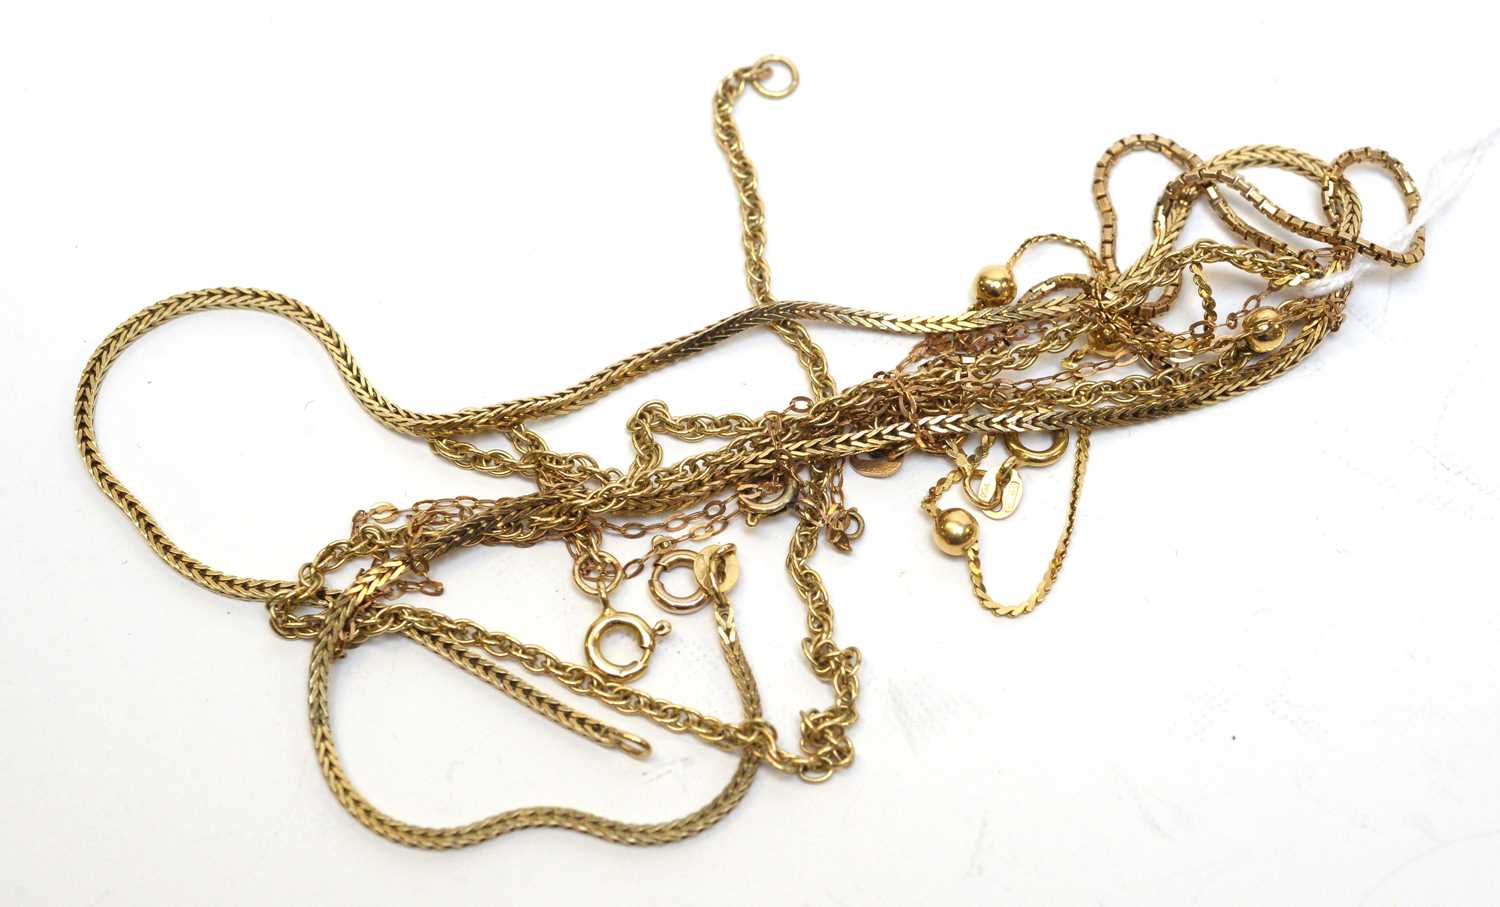 Lot 152 - Gold and yellow-metal necklaces and bracelets.